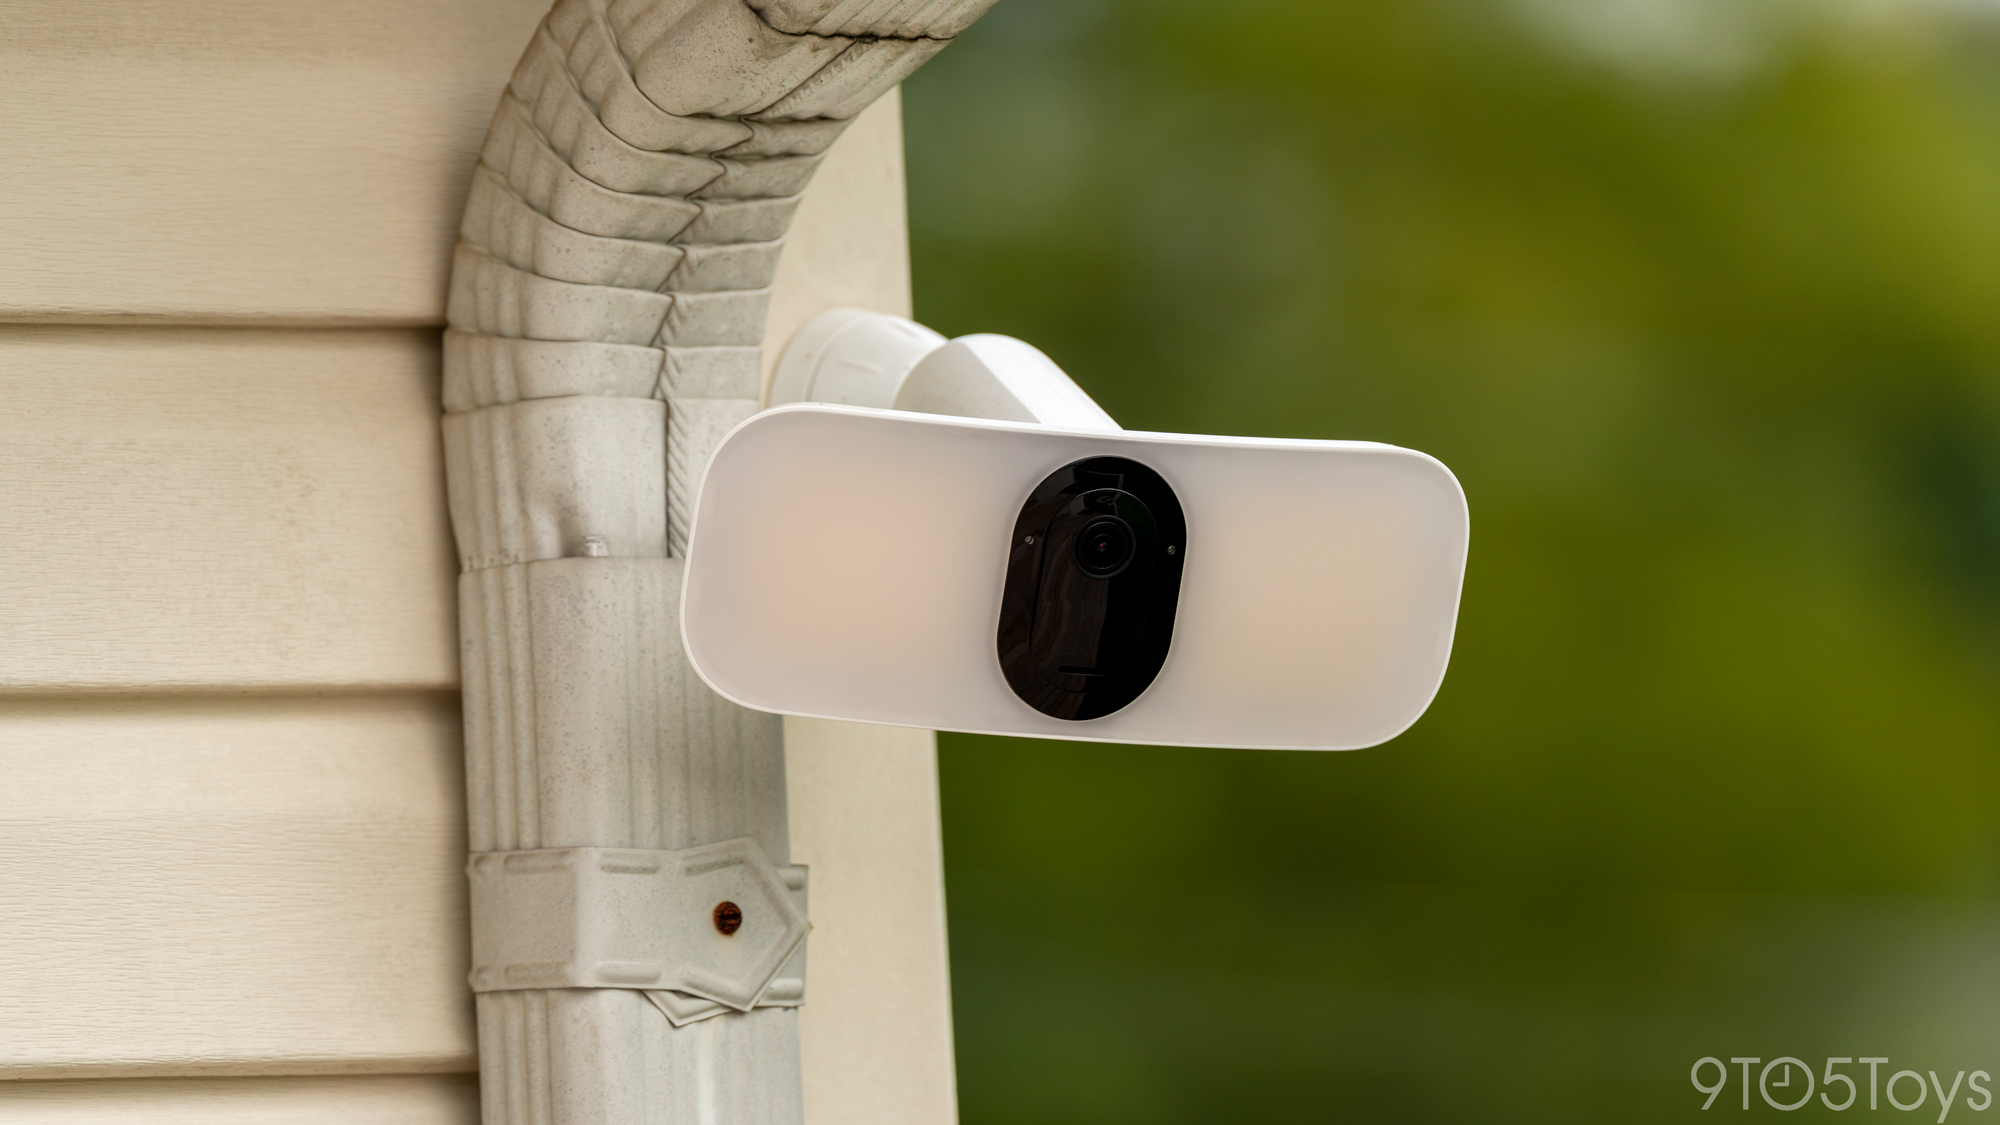 Arlo Pro Floodlight + Doorbell Camera Review - 9to5Toys